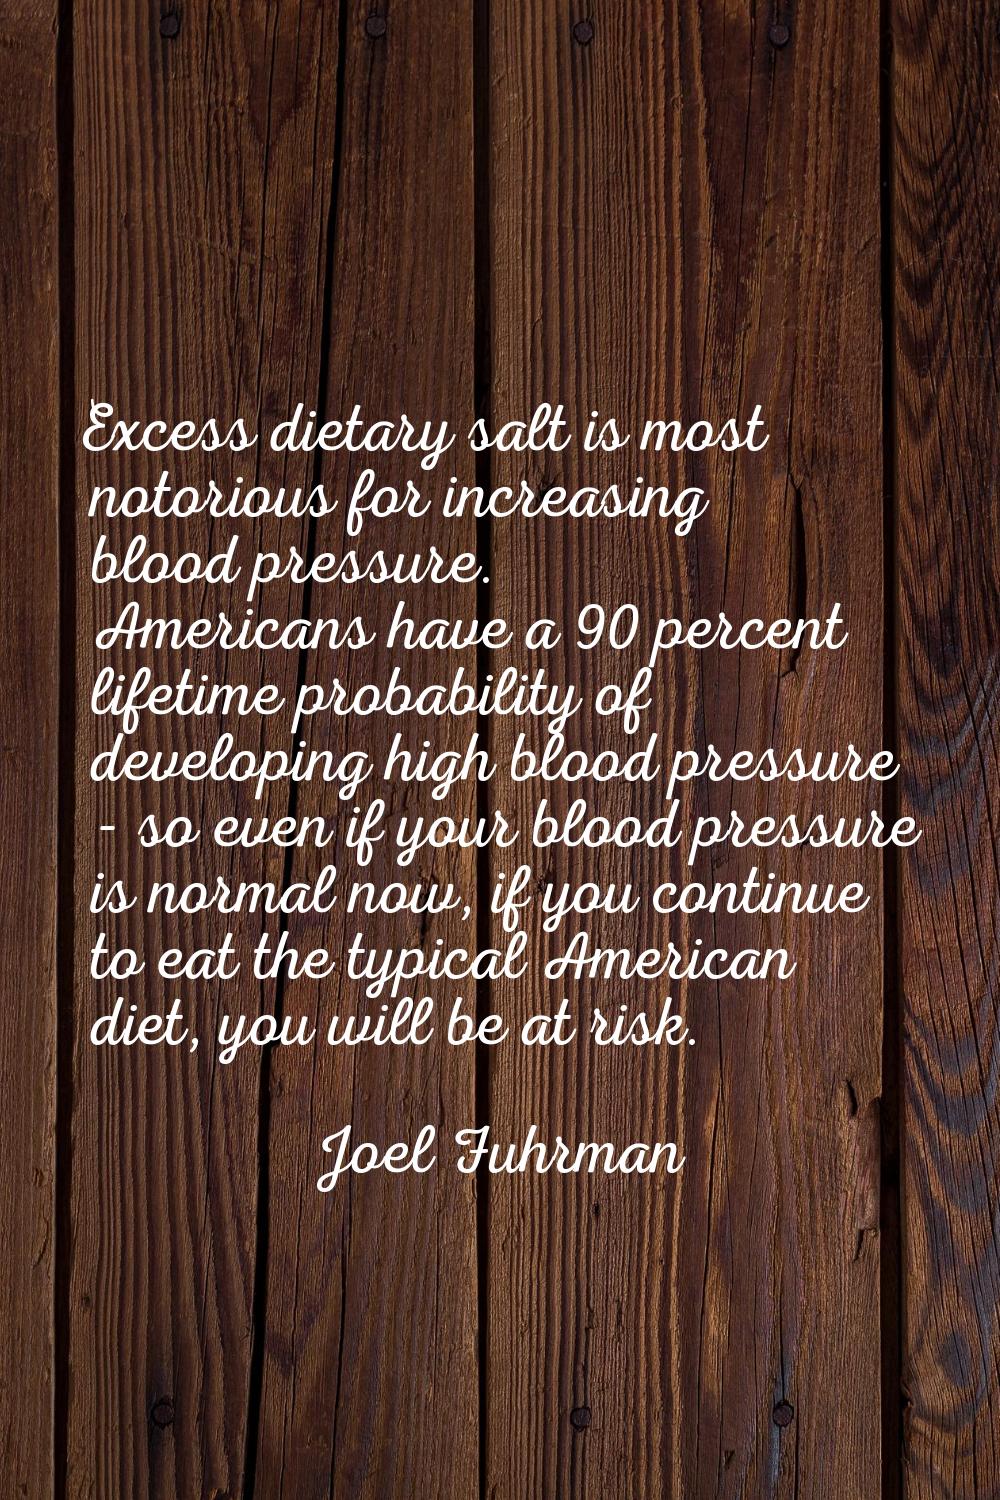 Excess dietary salt is most notorious for increasing blood pressure. Americans have a 90 percent li